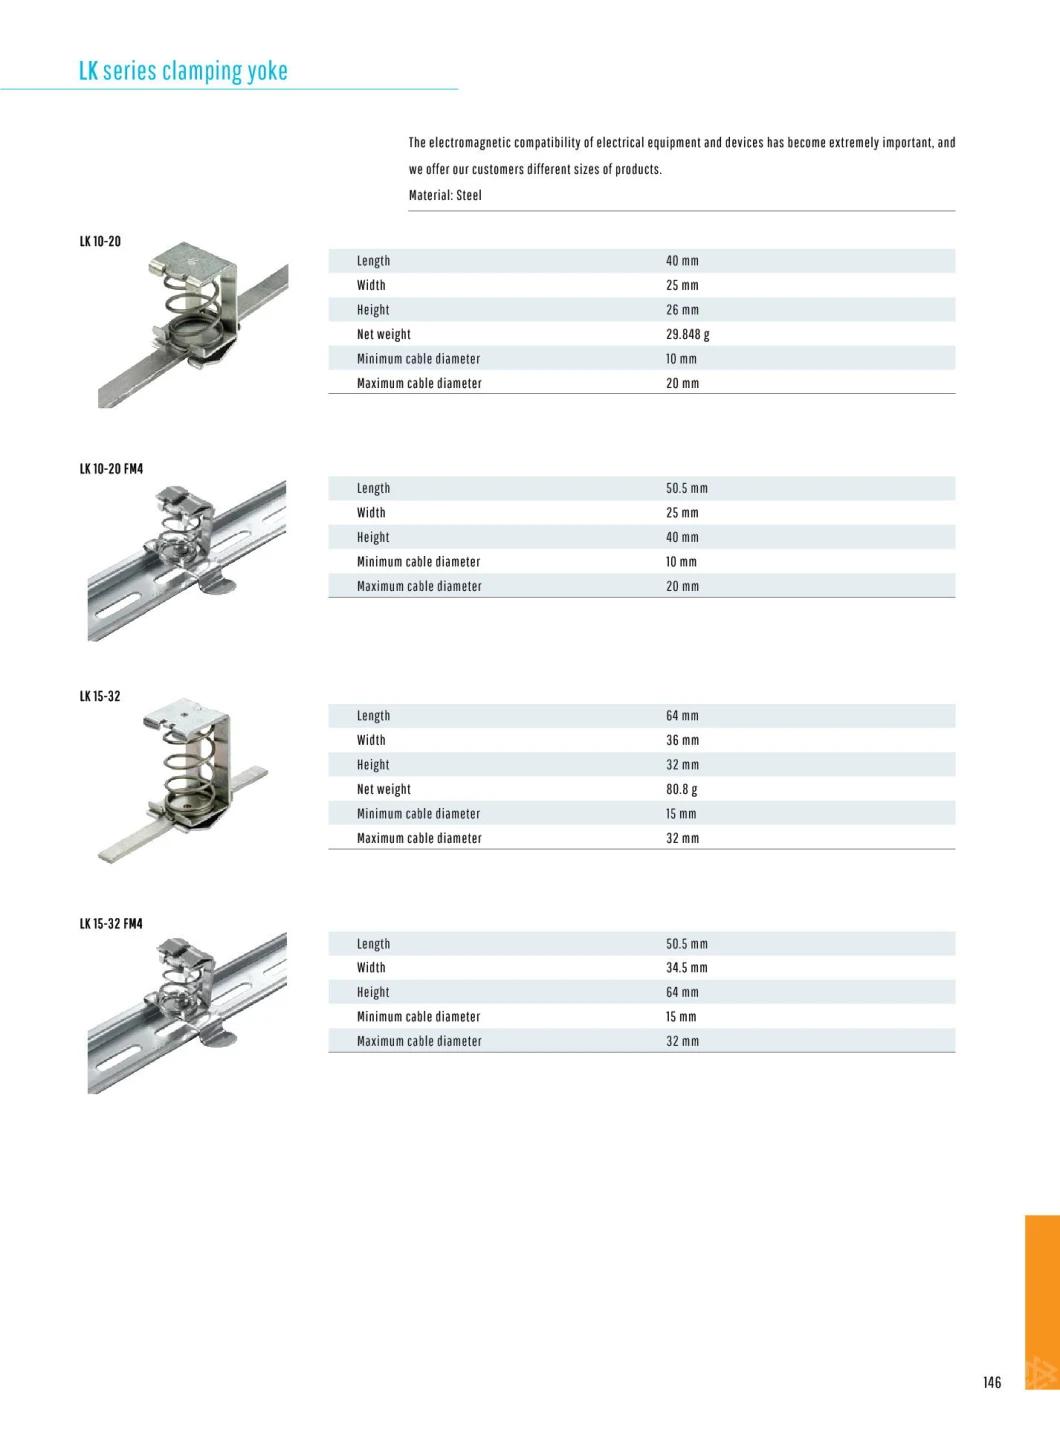 High Quality EMC Cable Clamp Steel DIN Rail Clamping Yoke